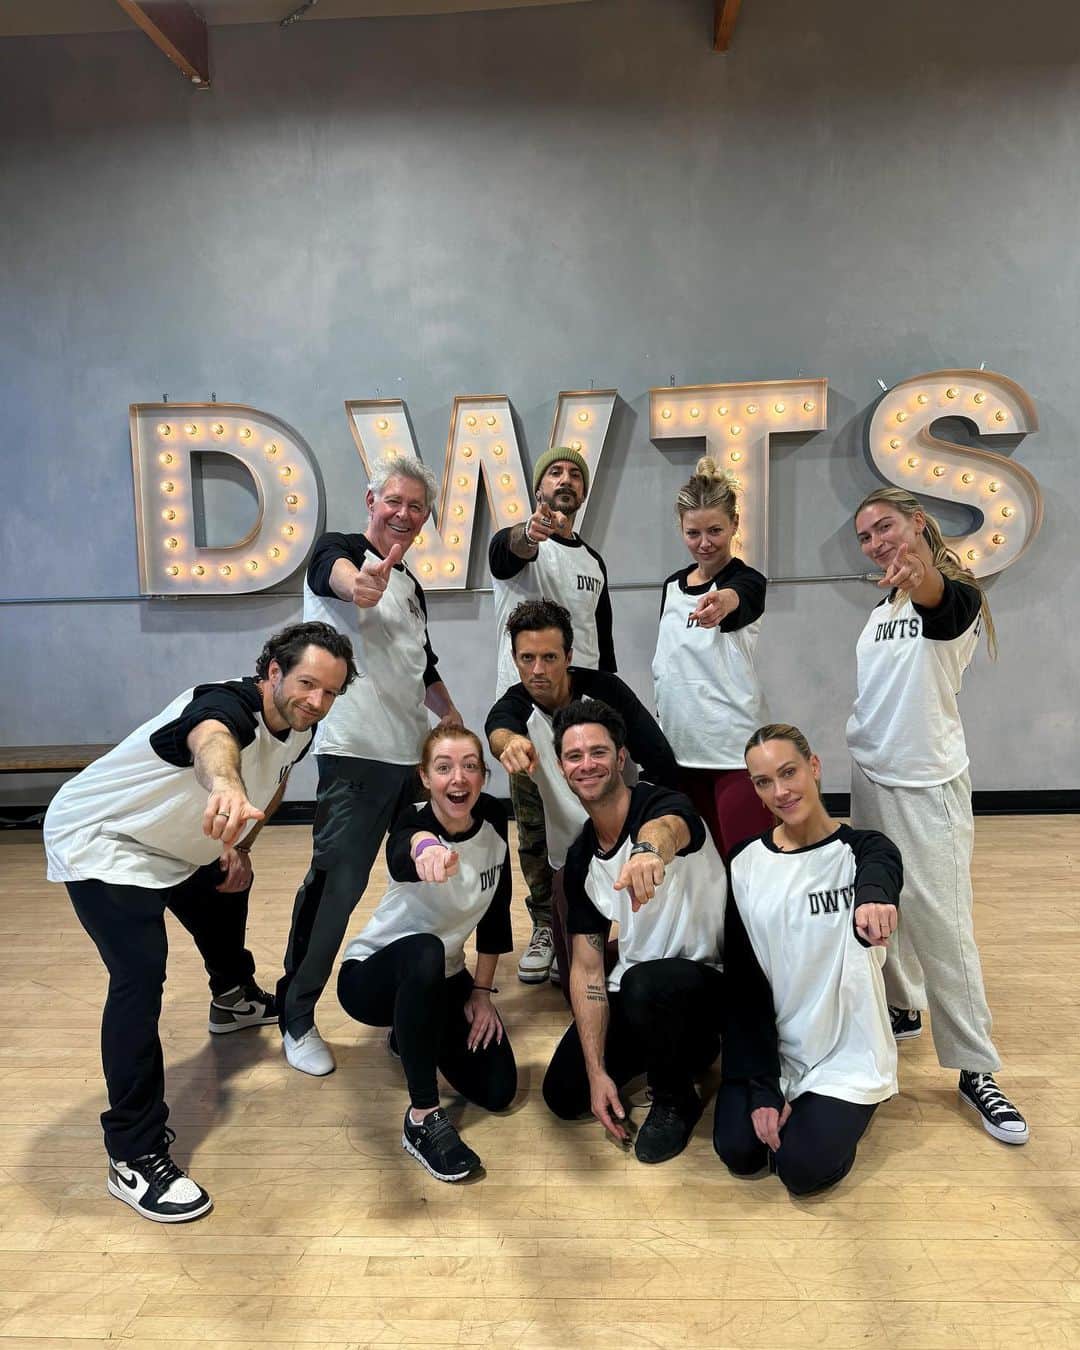 A.J.のインスタグラム：「So great to be back on set and part of a secret surprise @dancingwiththestars, hope I helped ‘everybody’ with their performances, ha!! Thanks for having me guys!!!!」